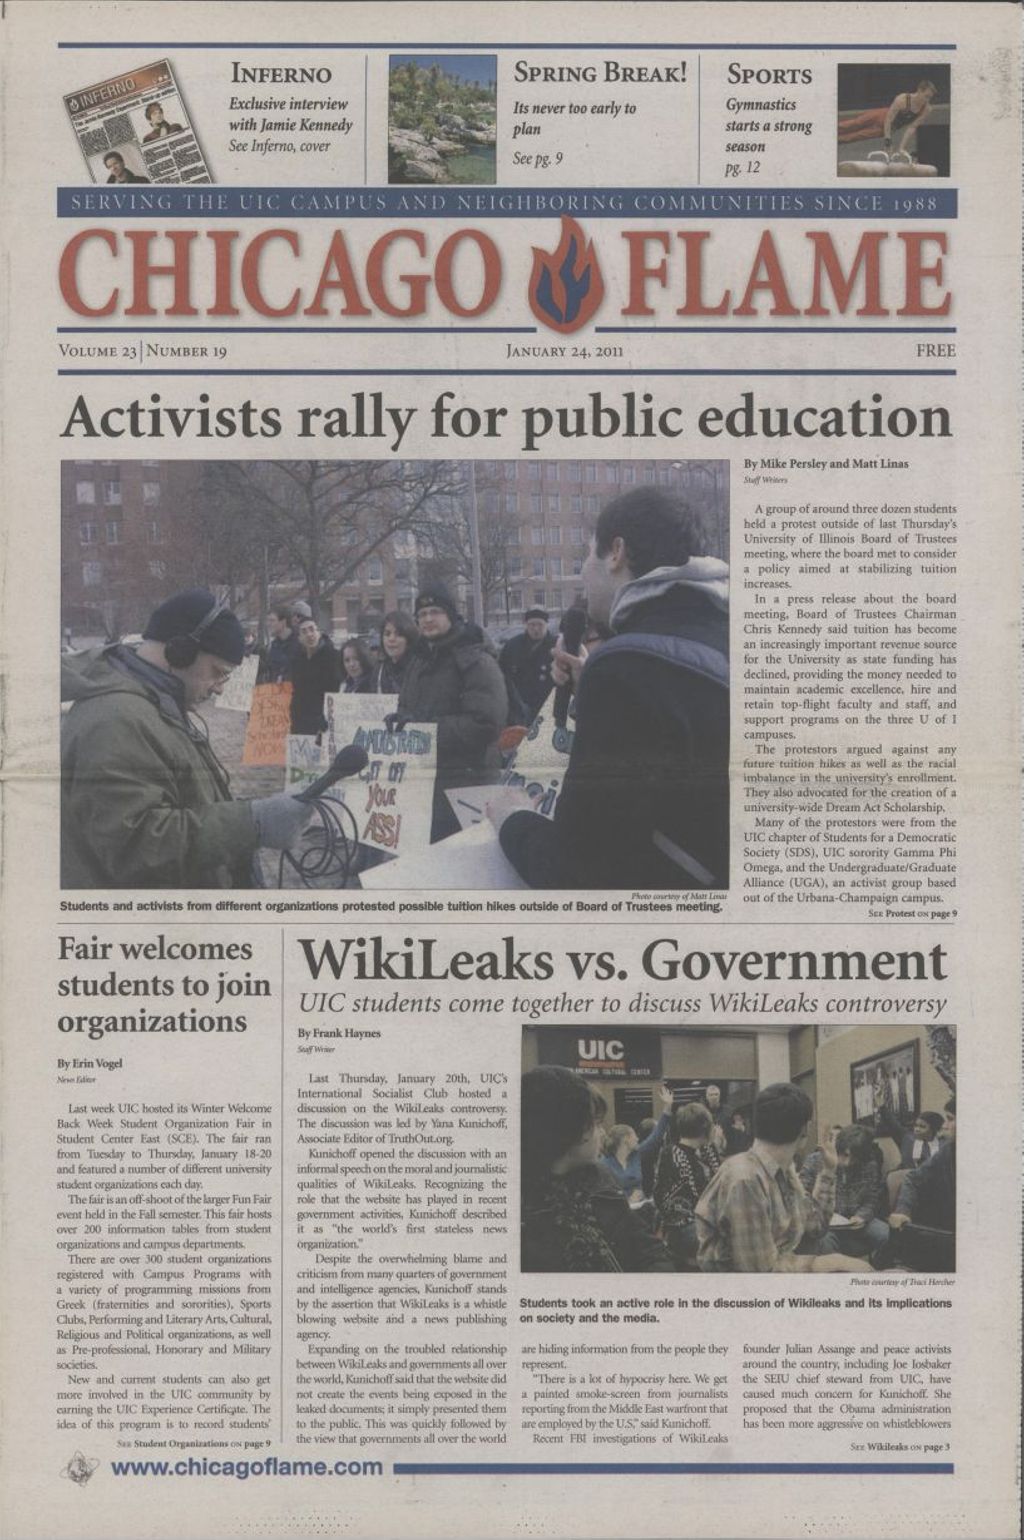 Chicago Flame (January 24, 2011)